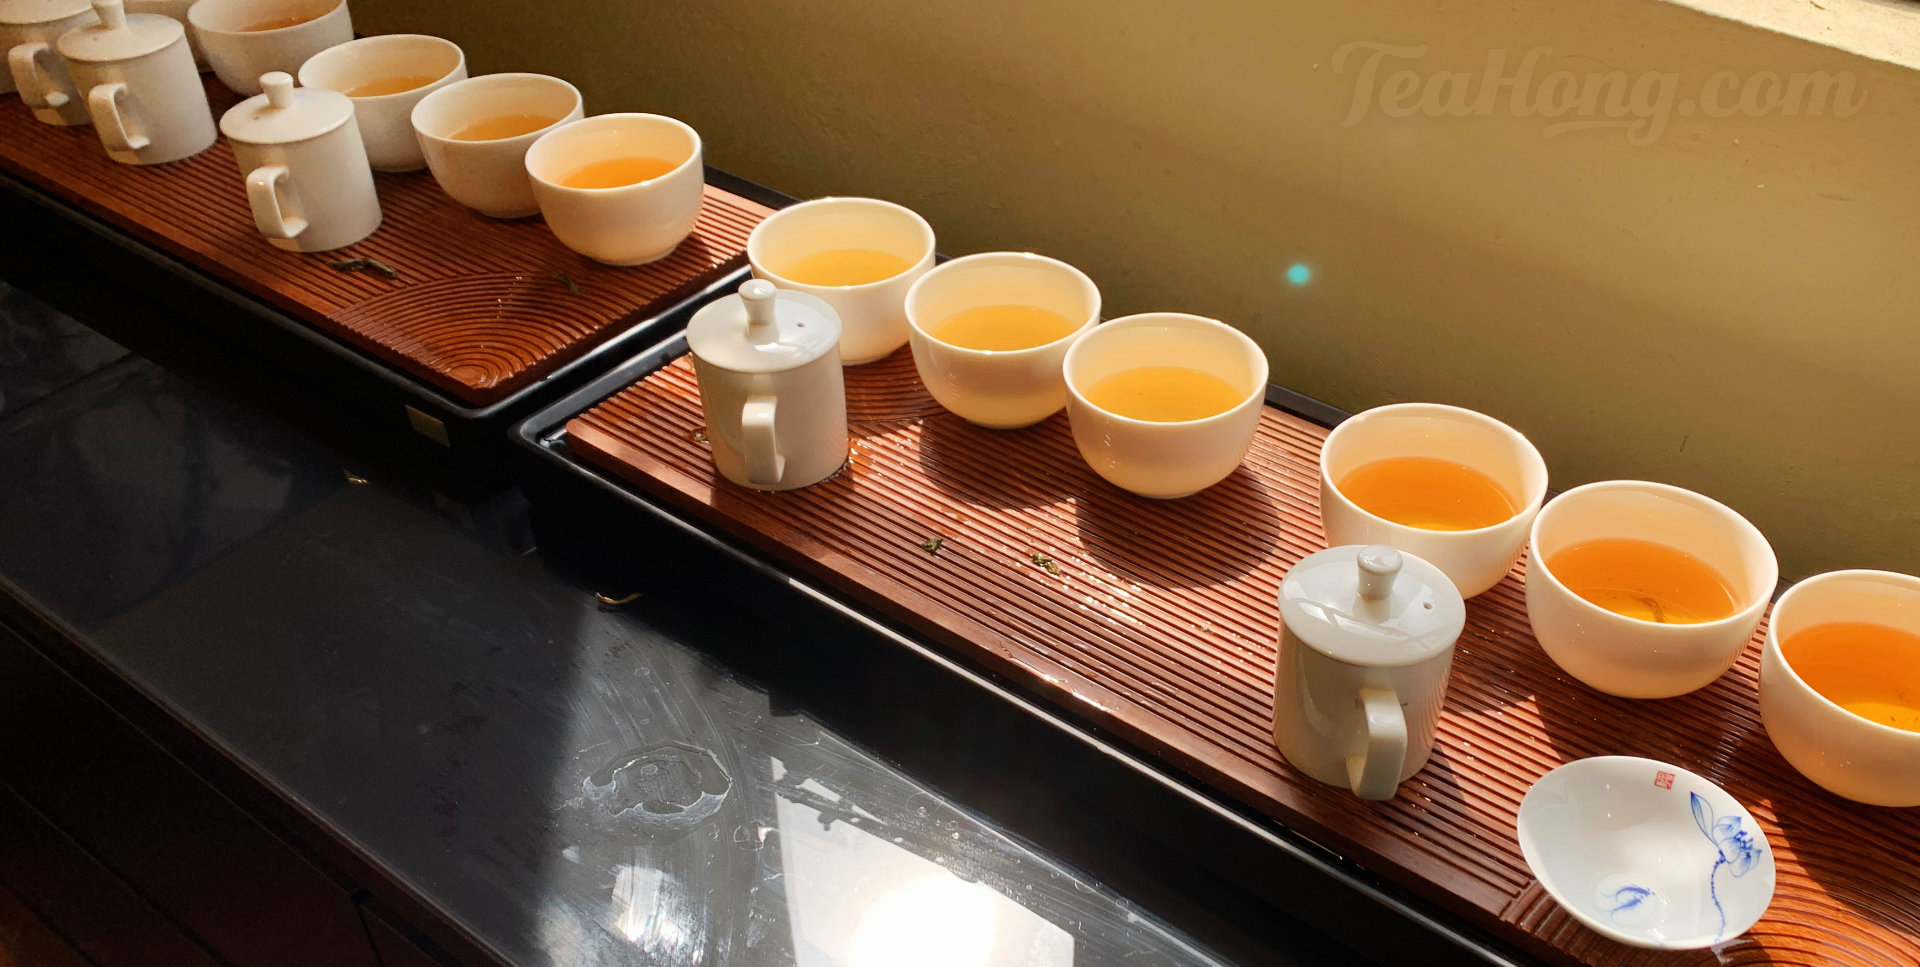 Each taster mug is coupled with three cups of infusion at different infusion parameters